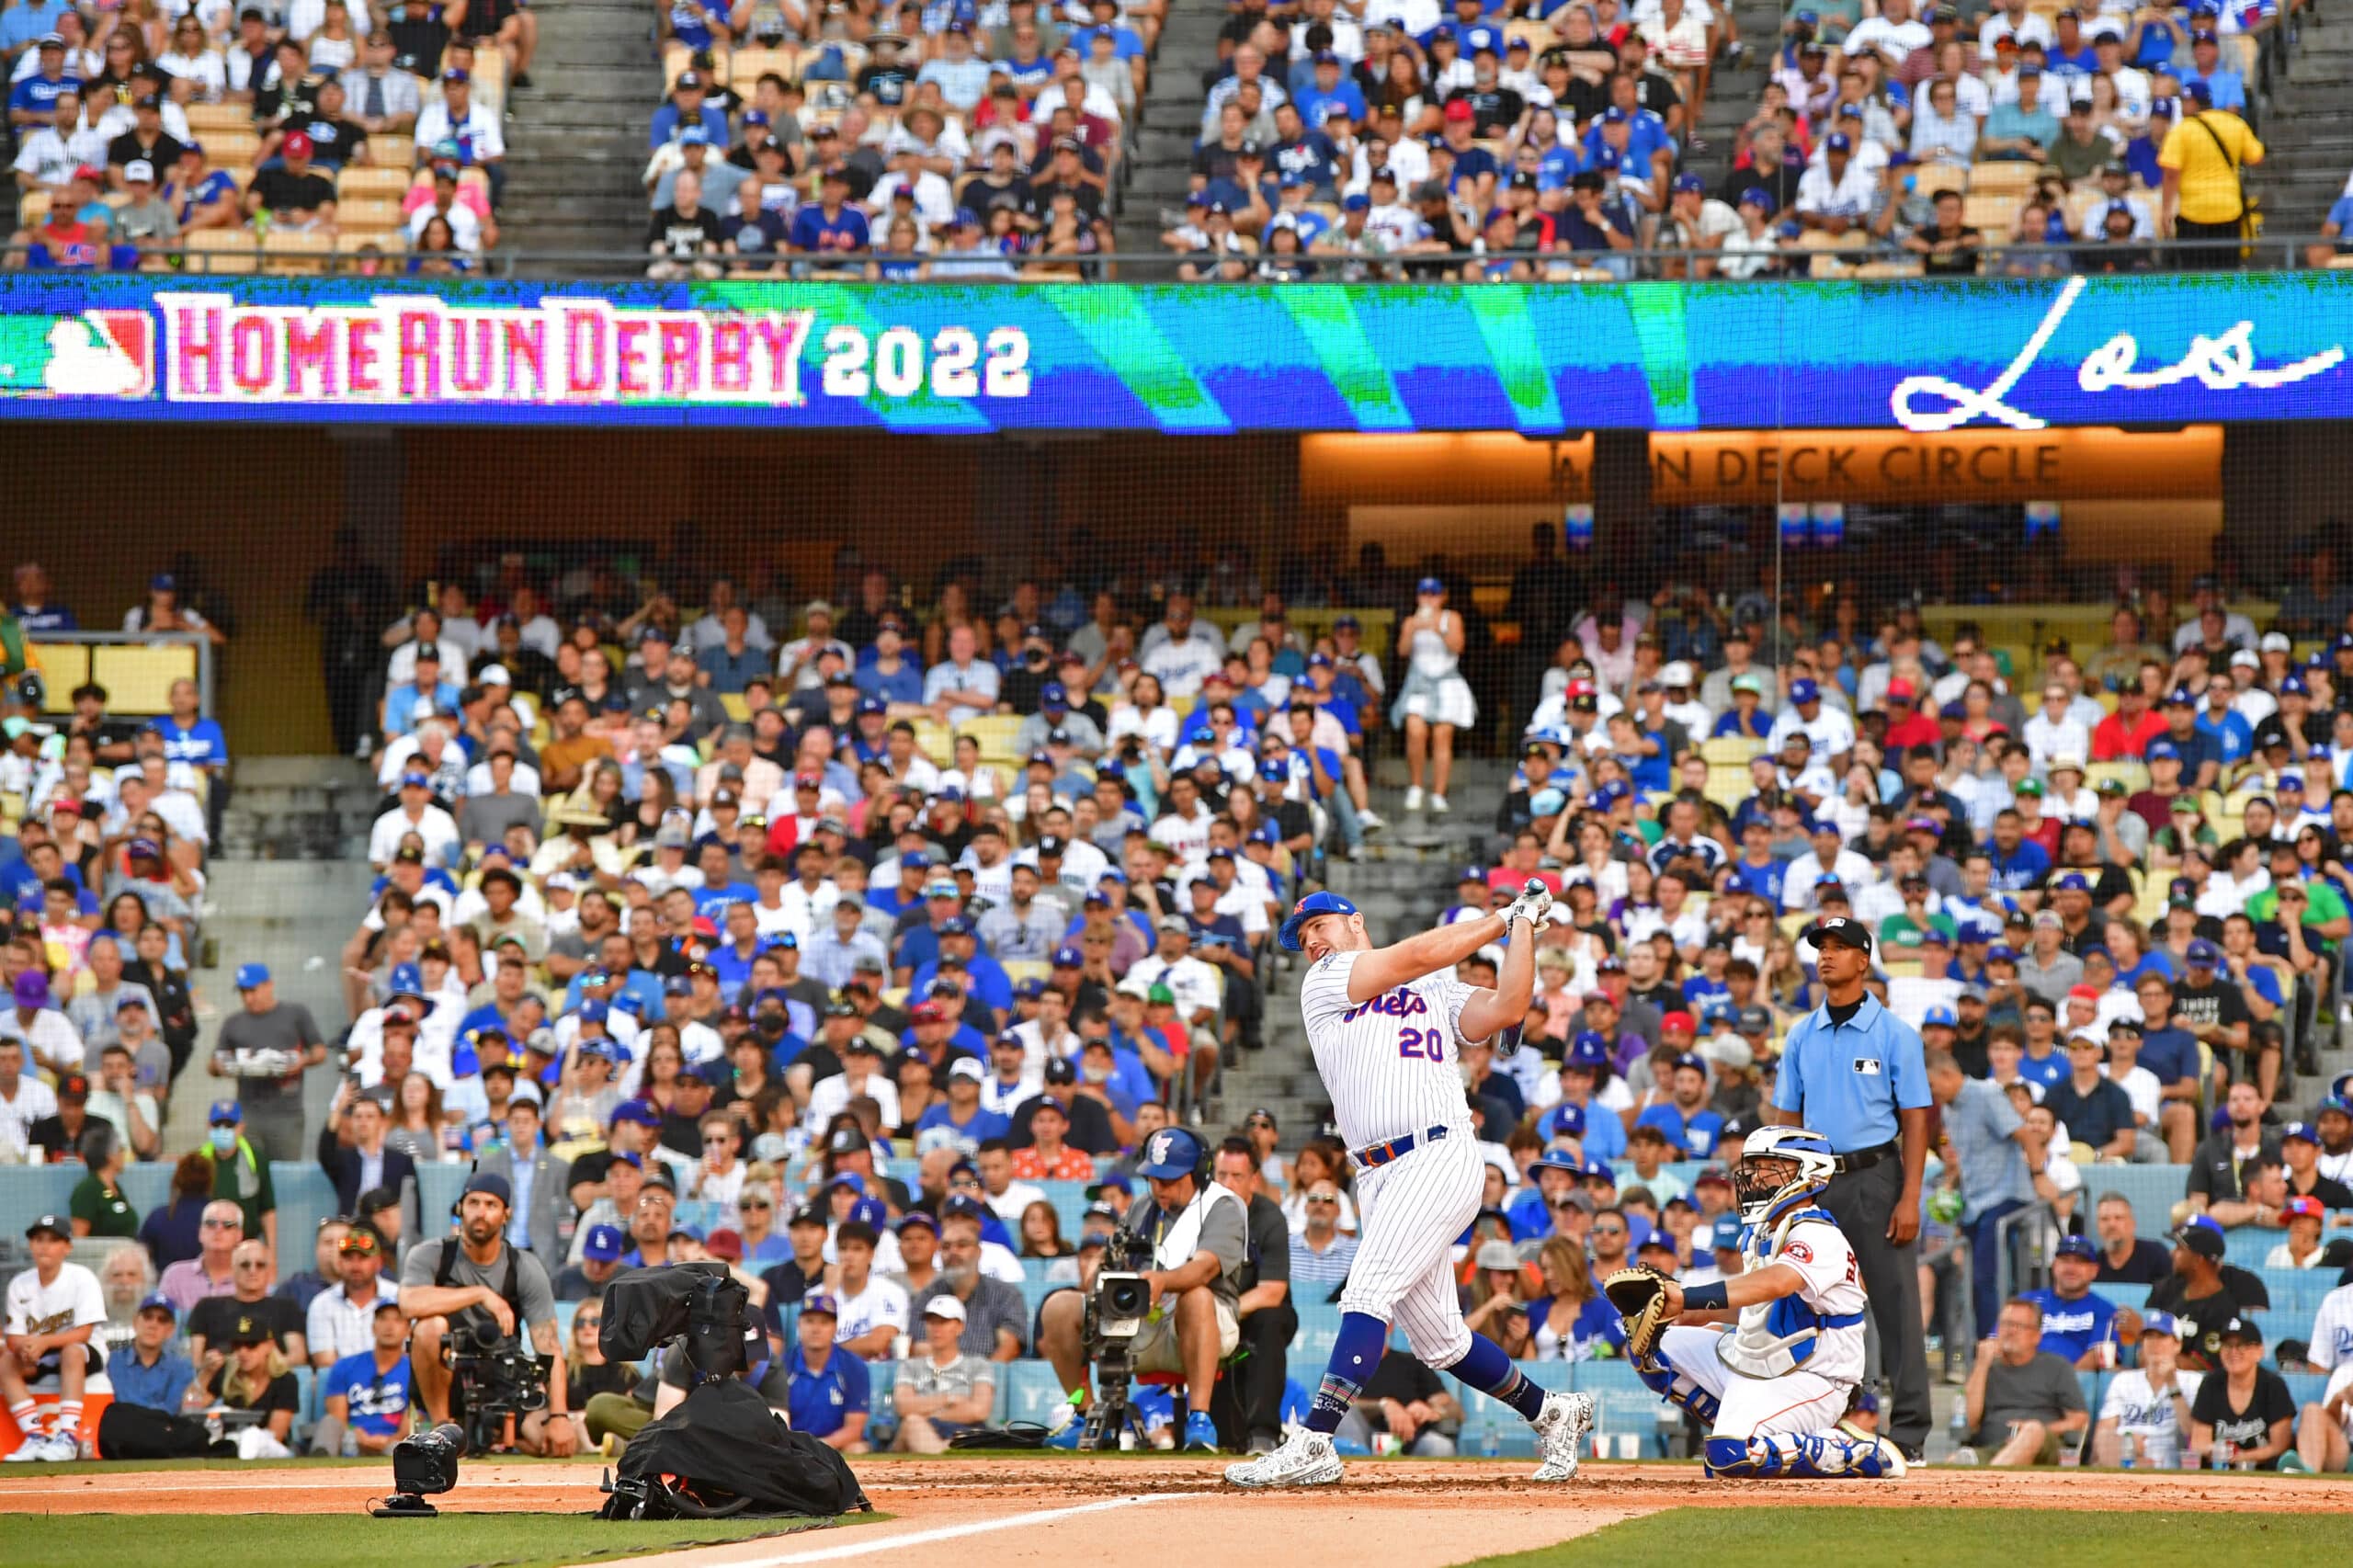 Pete Alonso returns to Home Run Derby seeking third title - The